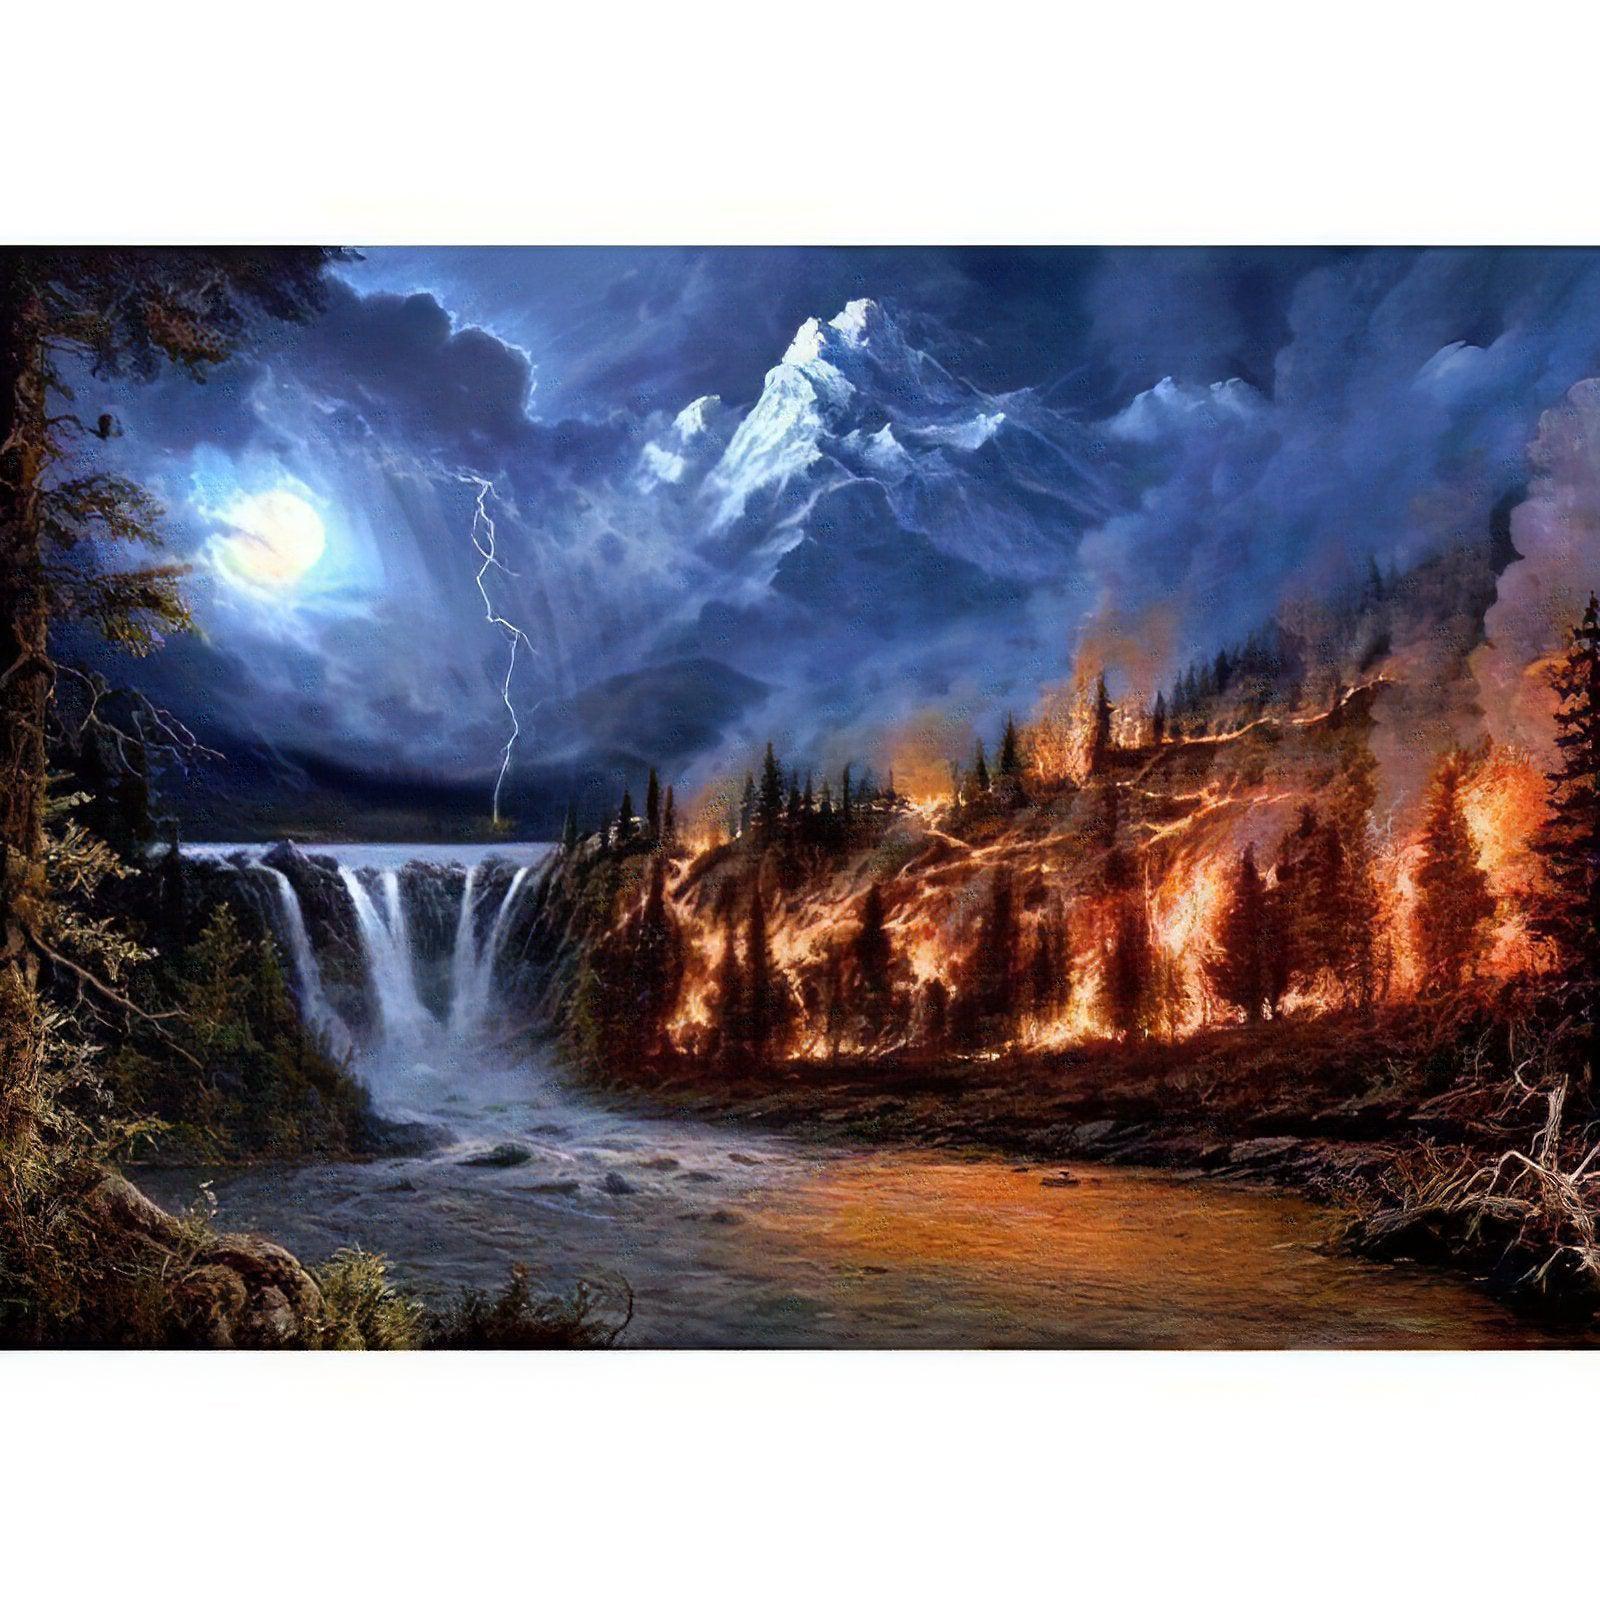 Witness the formidable power of Nature's Wrath in this dramatic landscape scene.Nature'S Wrath - Diamondartlove